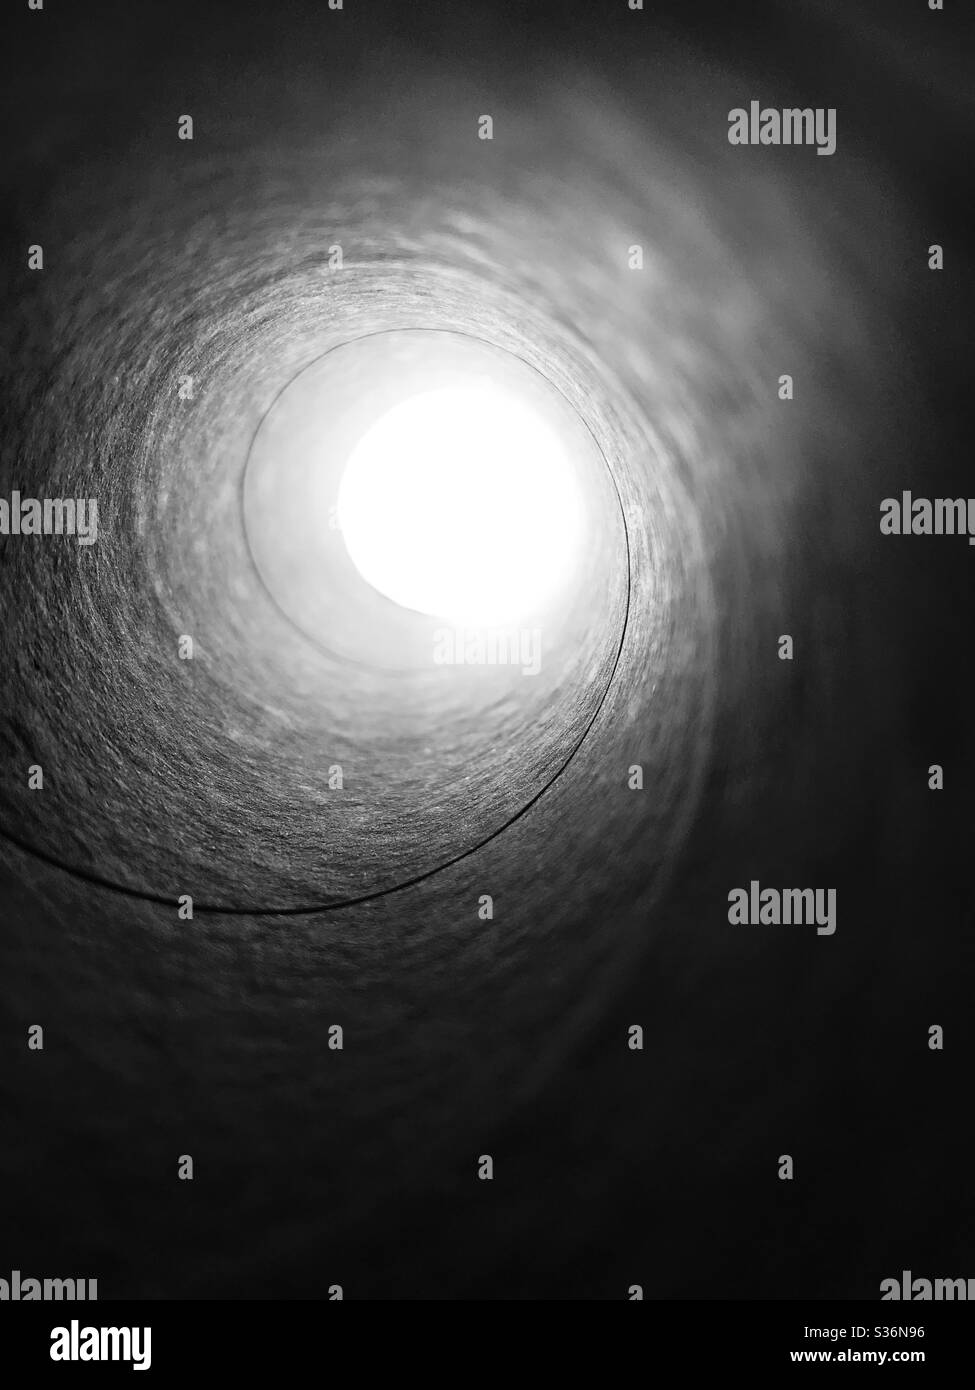 Dramatic Sky view through an spiral empty tissue roll in black & white mode , imagination for ray of hope Stock Photo